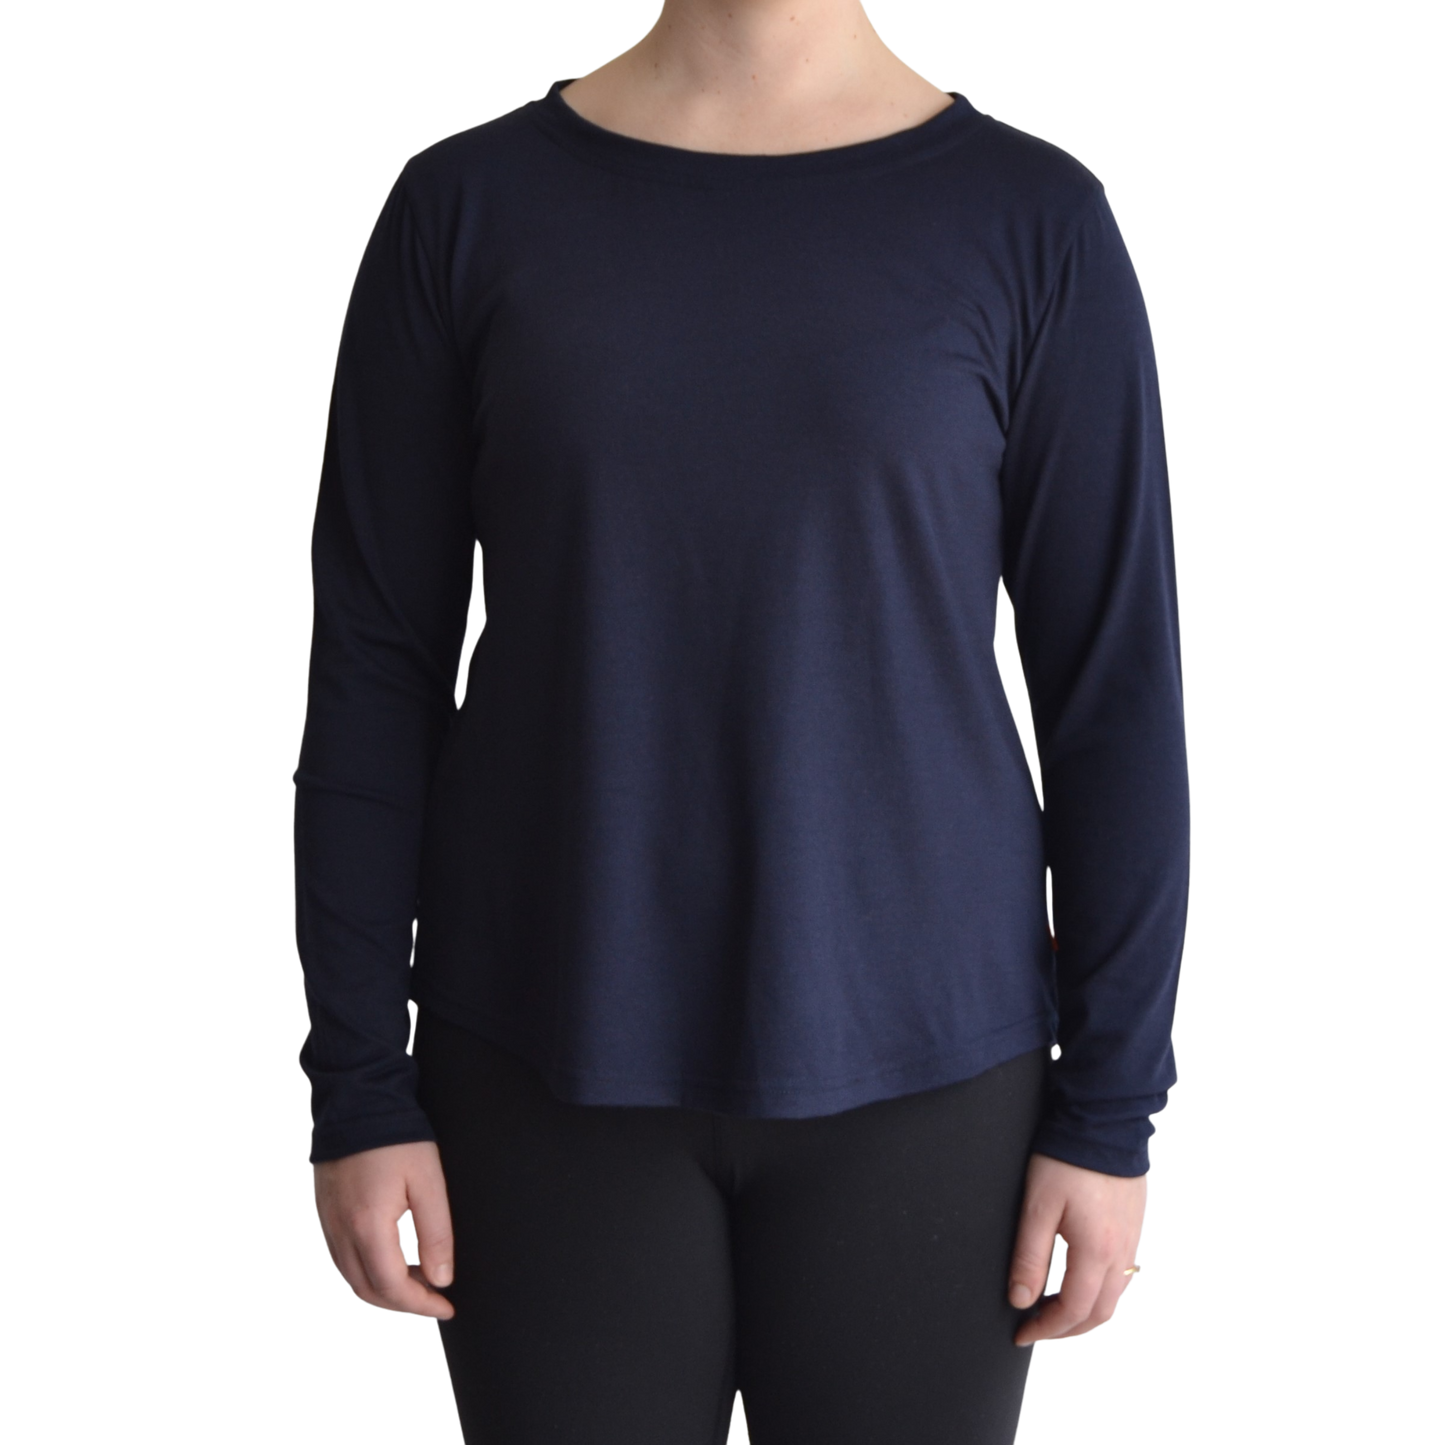 Links long sleeve merino top in navy blue colour, model faces forward showing the front of the top with scooped neck and hemline.. 